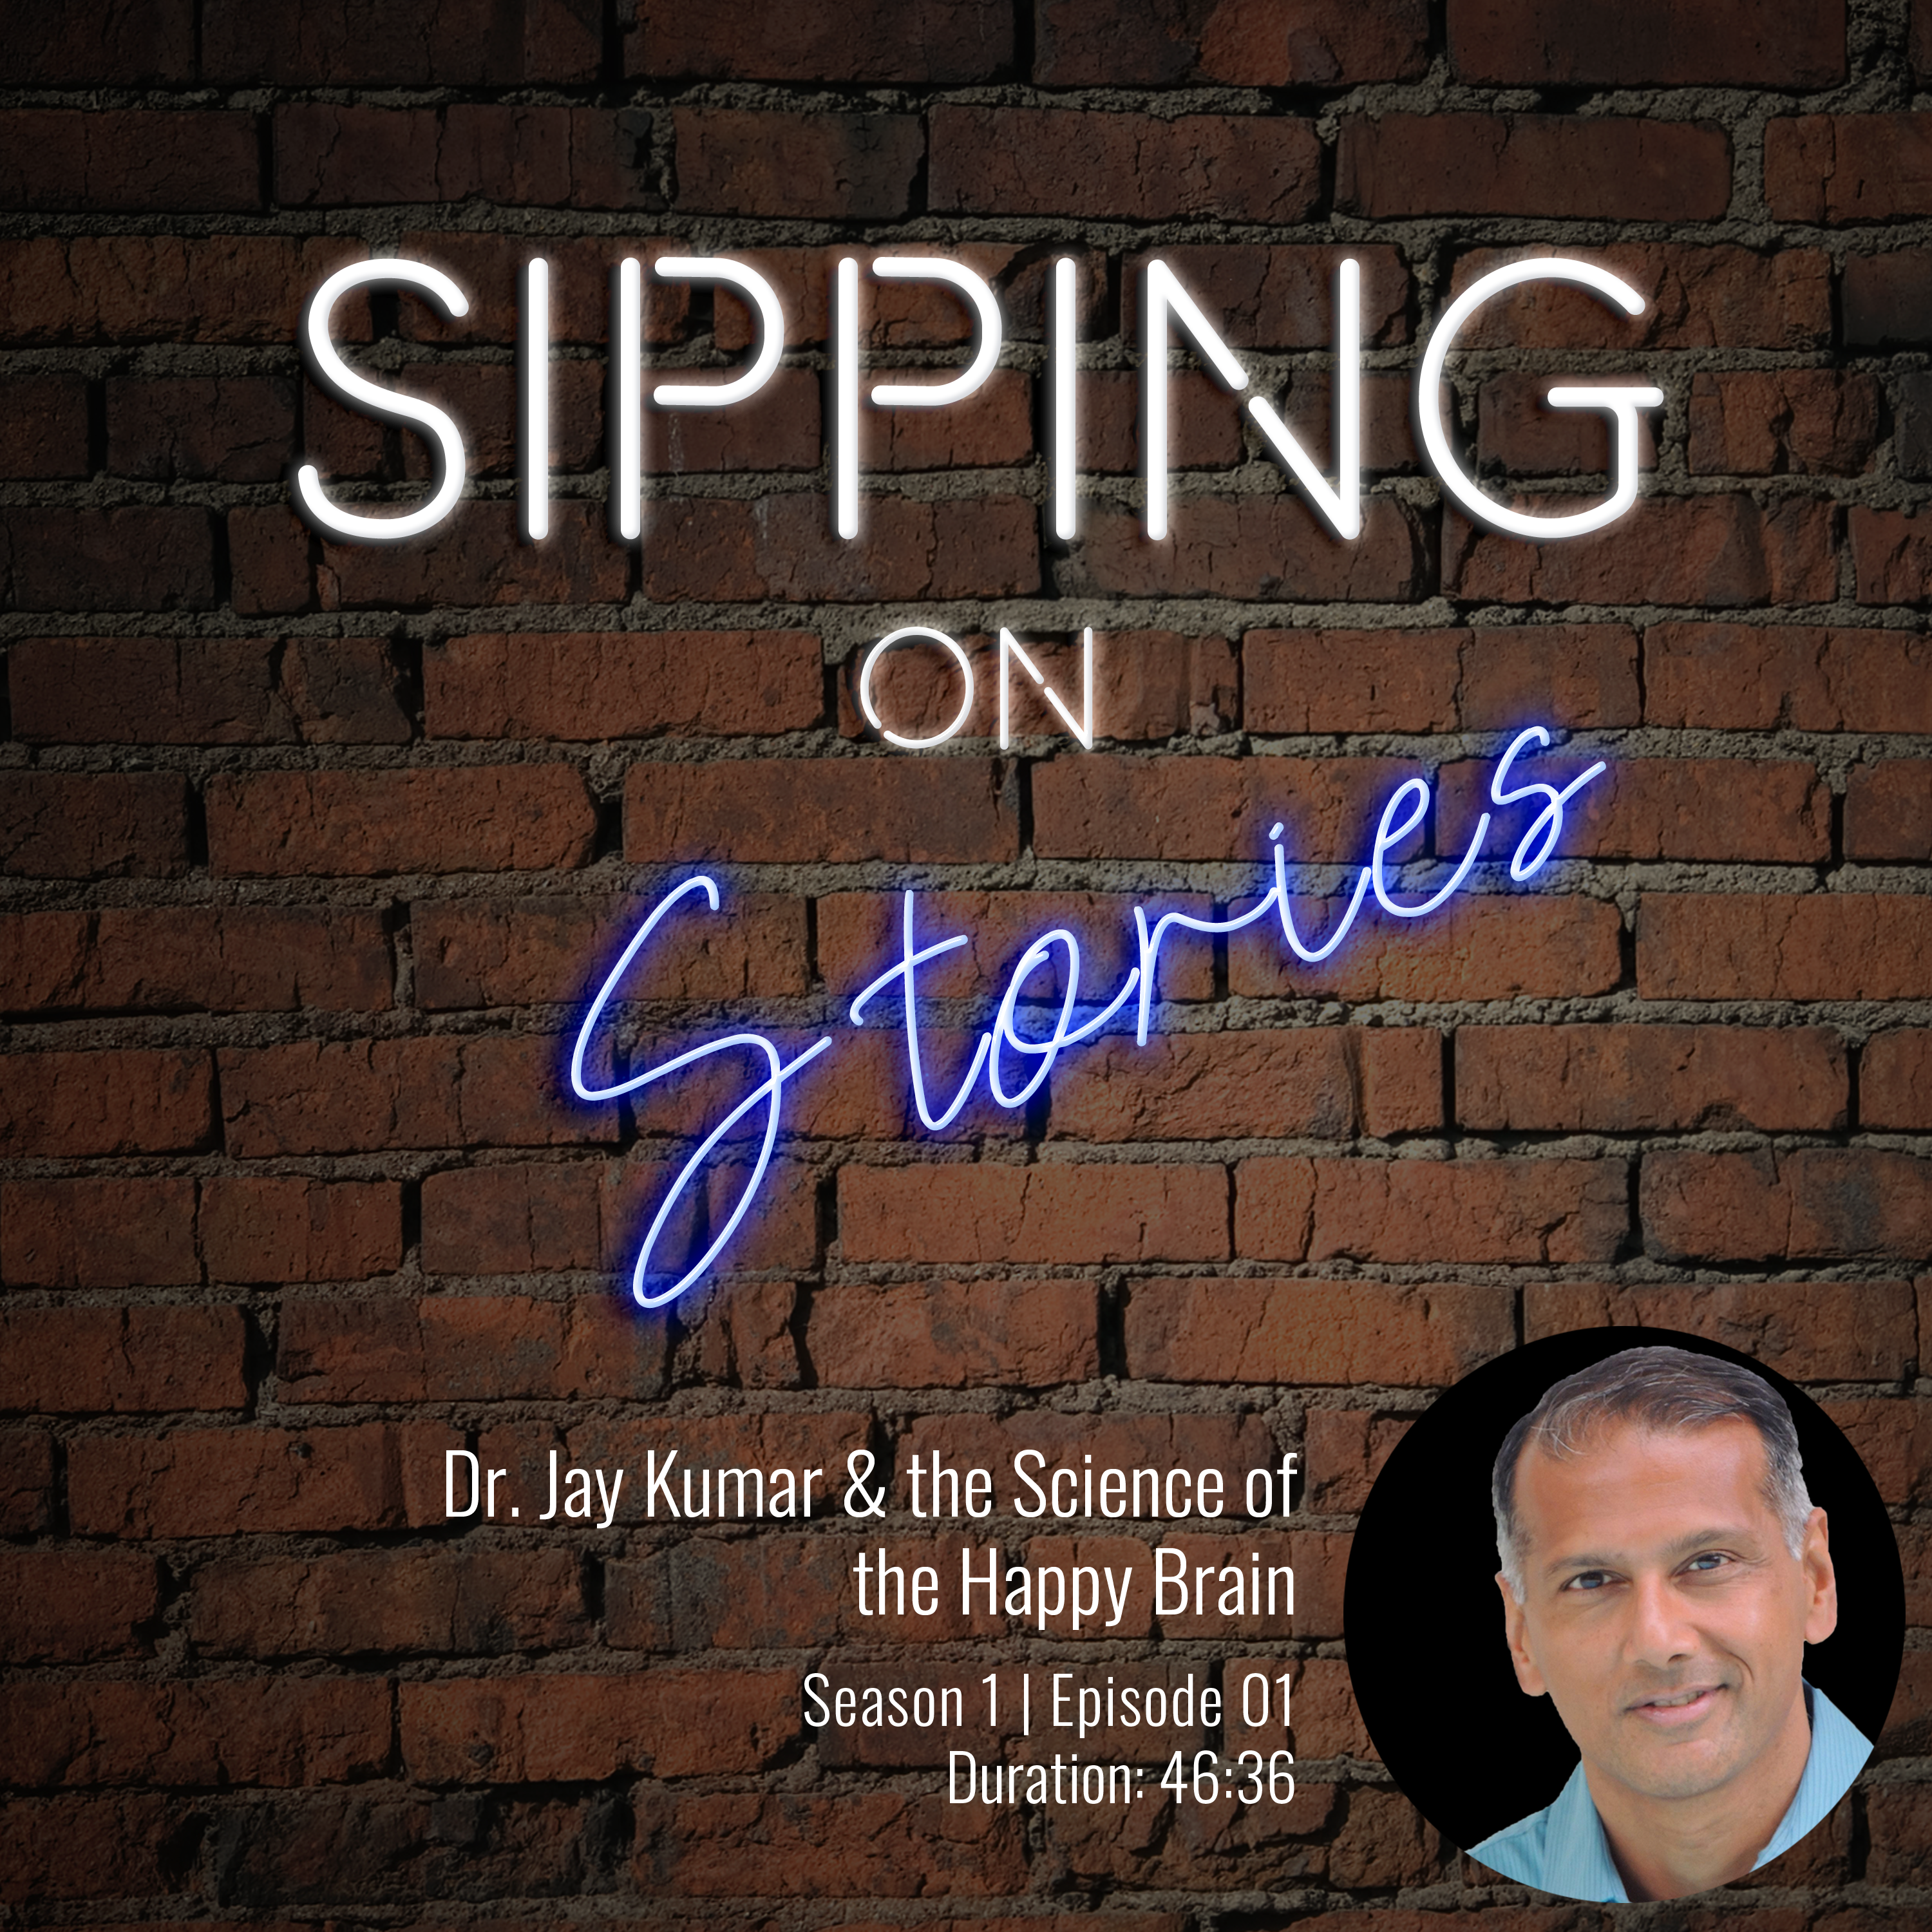 Dr. Jay Kumar & the Science of the Happy Brain